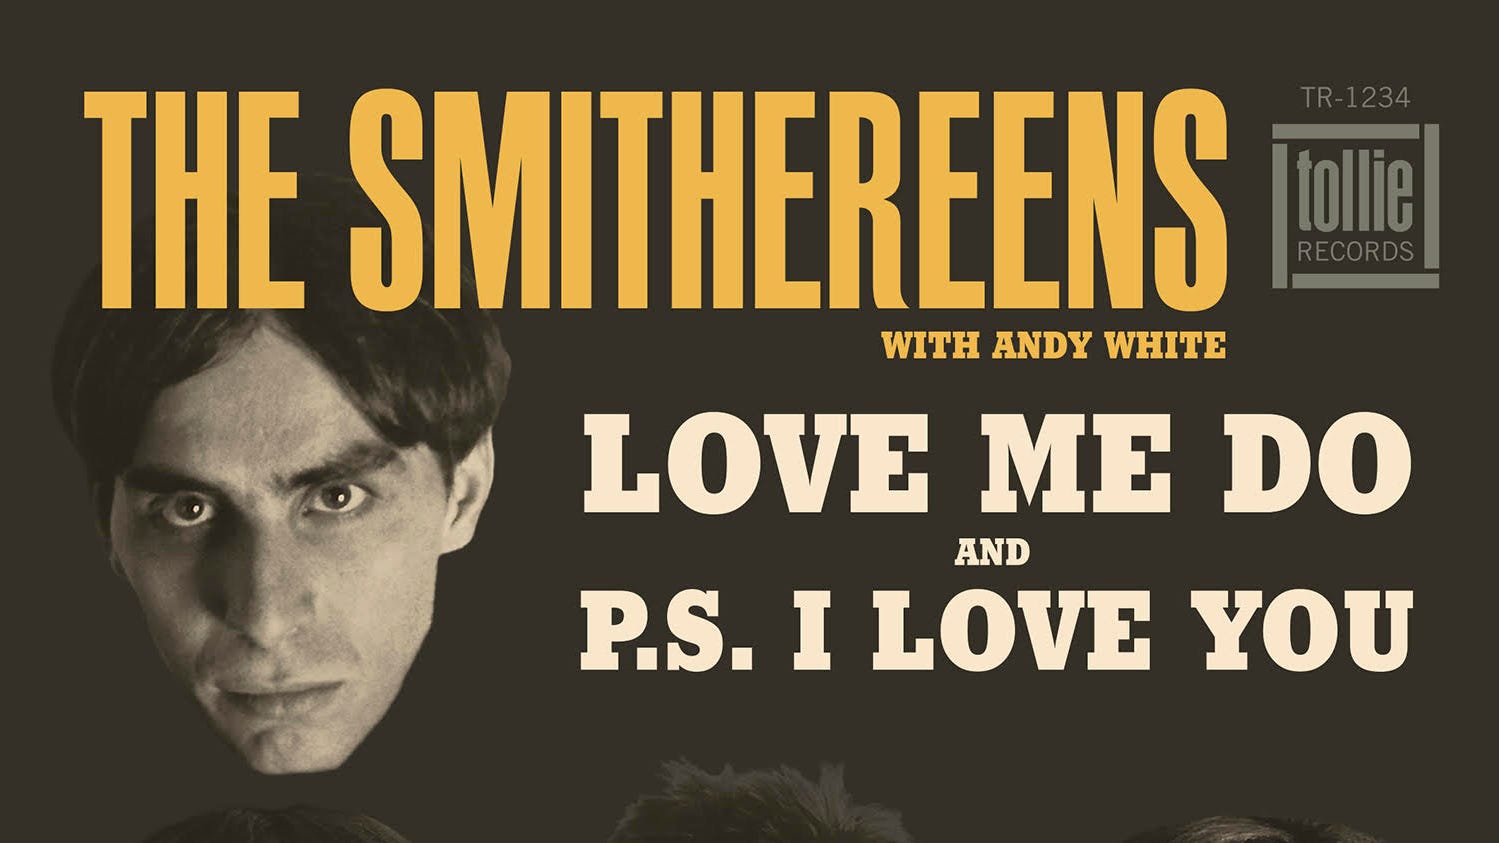 Smithereens release 'Love Me Do' cover with Beatles drummer not named